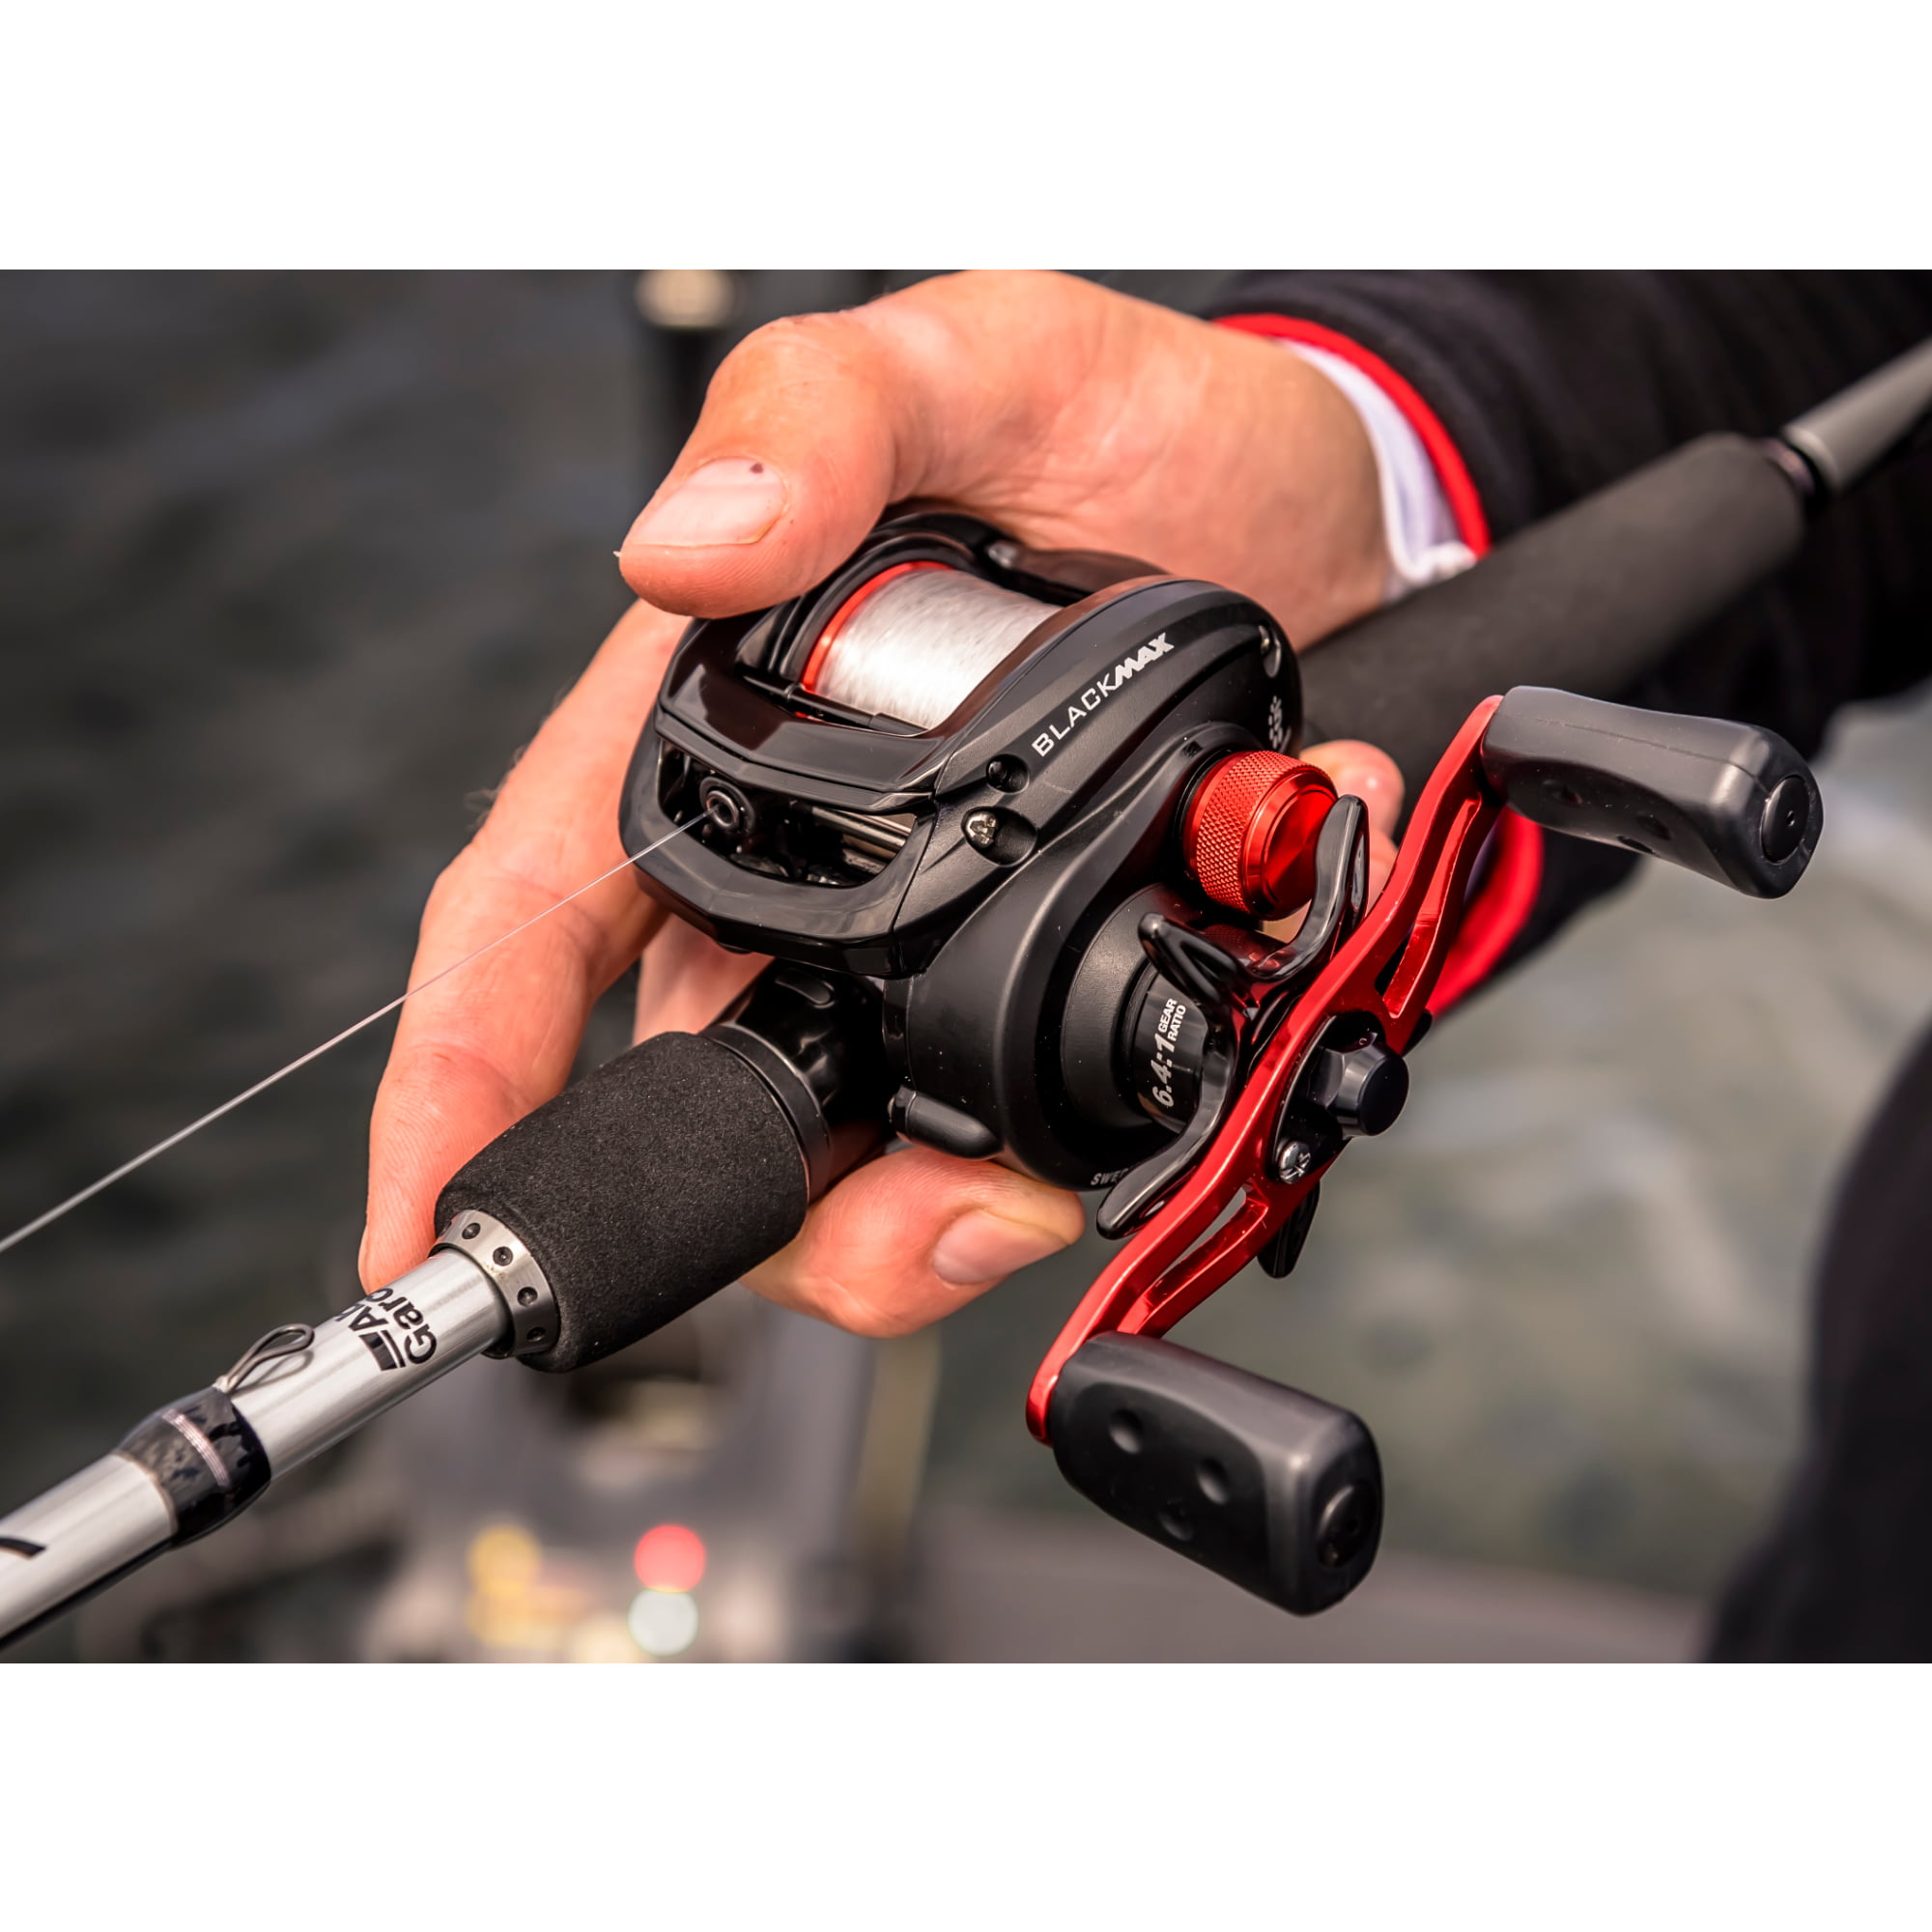 Details about   Abu Garcia Black Max Baitcast Low Profile Reel and Fishing Rod Combo 